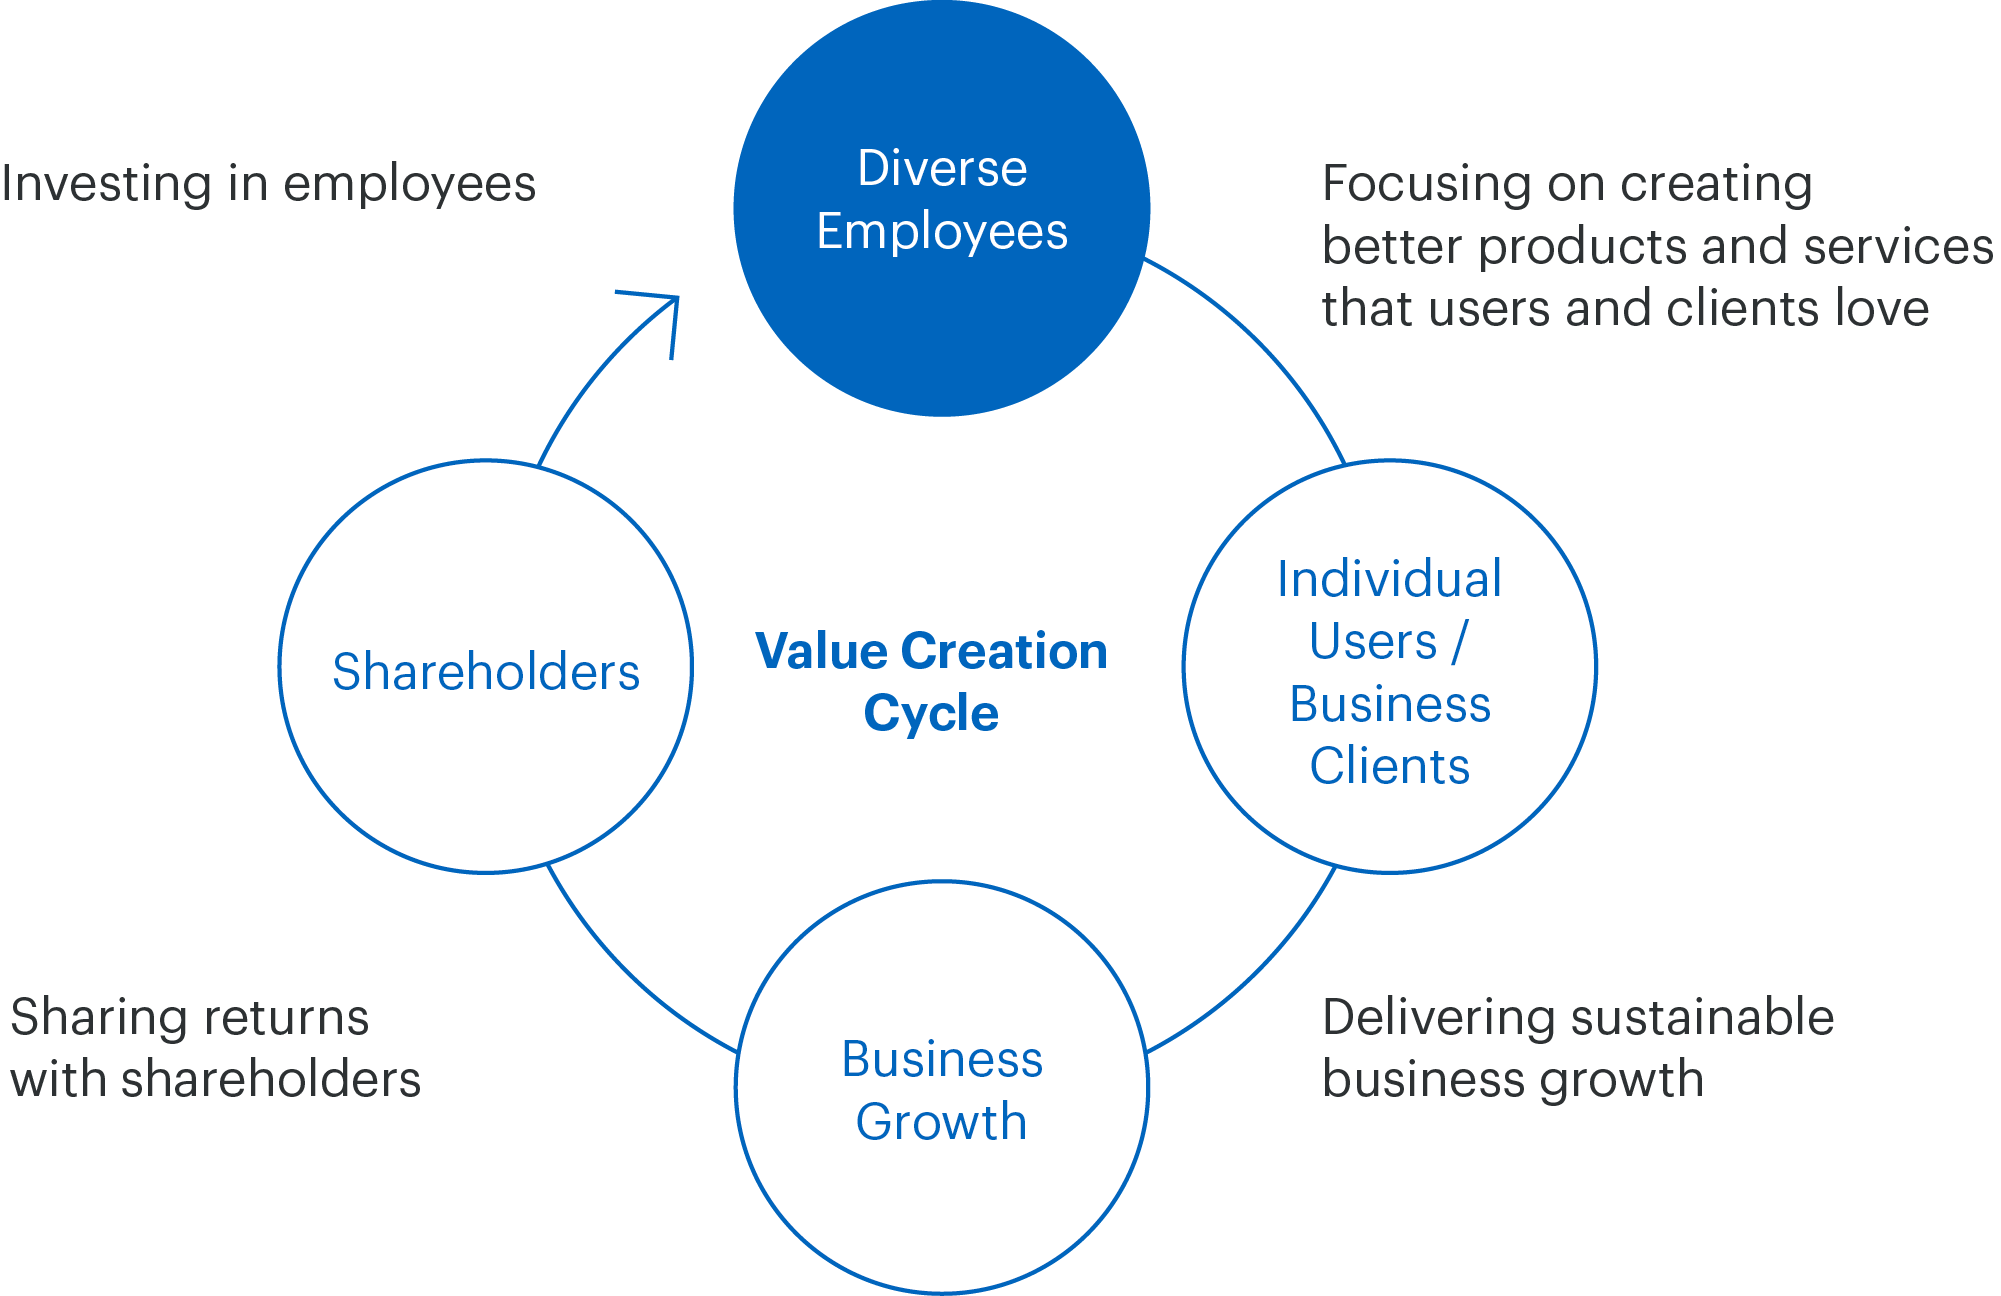 A diagram of Recruit Group’s value creation cycle. We believe that if our diverse employees continue to create products and services that users and customers love, our business will grow sustainably and we will be able to return profits to shareholders, which will lead to further investment in products and services.